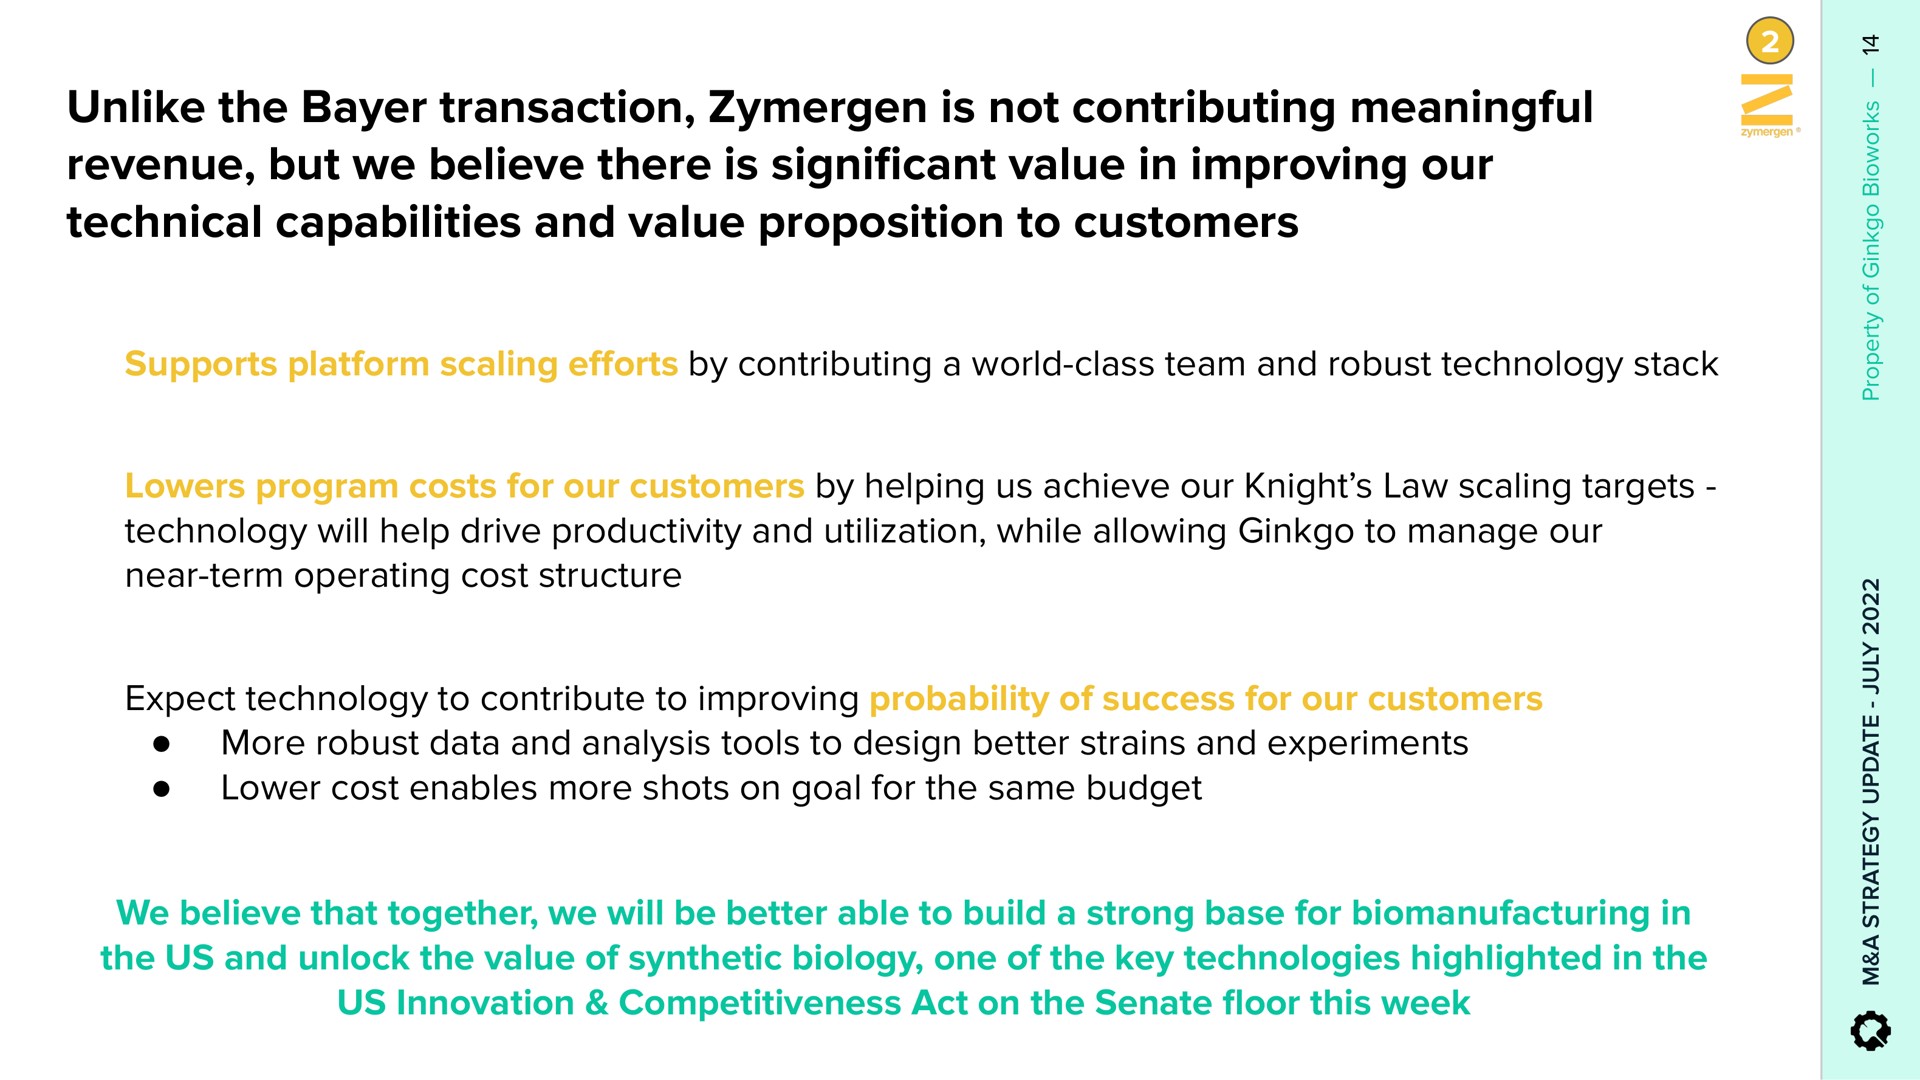 unlike the transaction is not contributing meaningful revenue but we believe there is cant value in improving our technical capabilities and value proposition to customers significant | Ginkgo